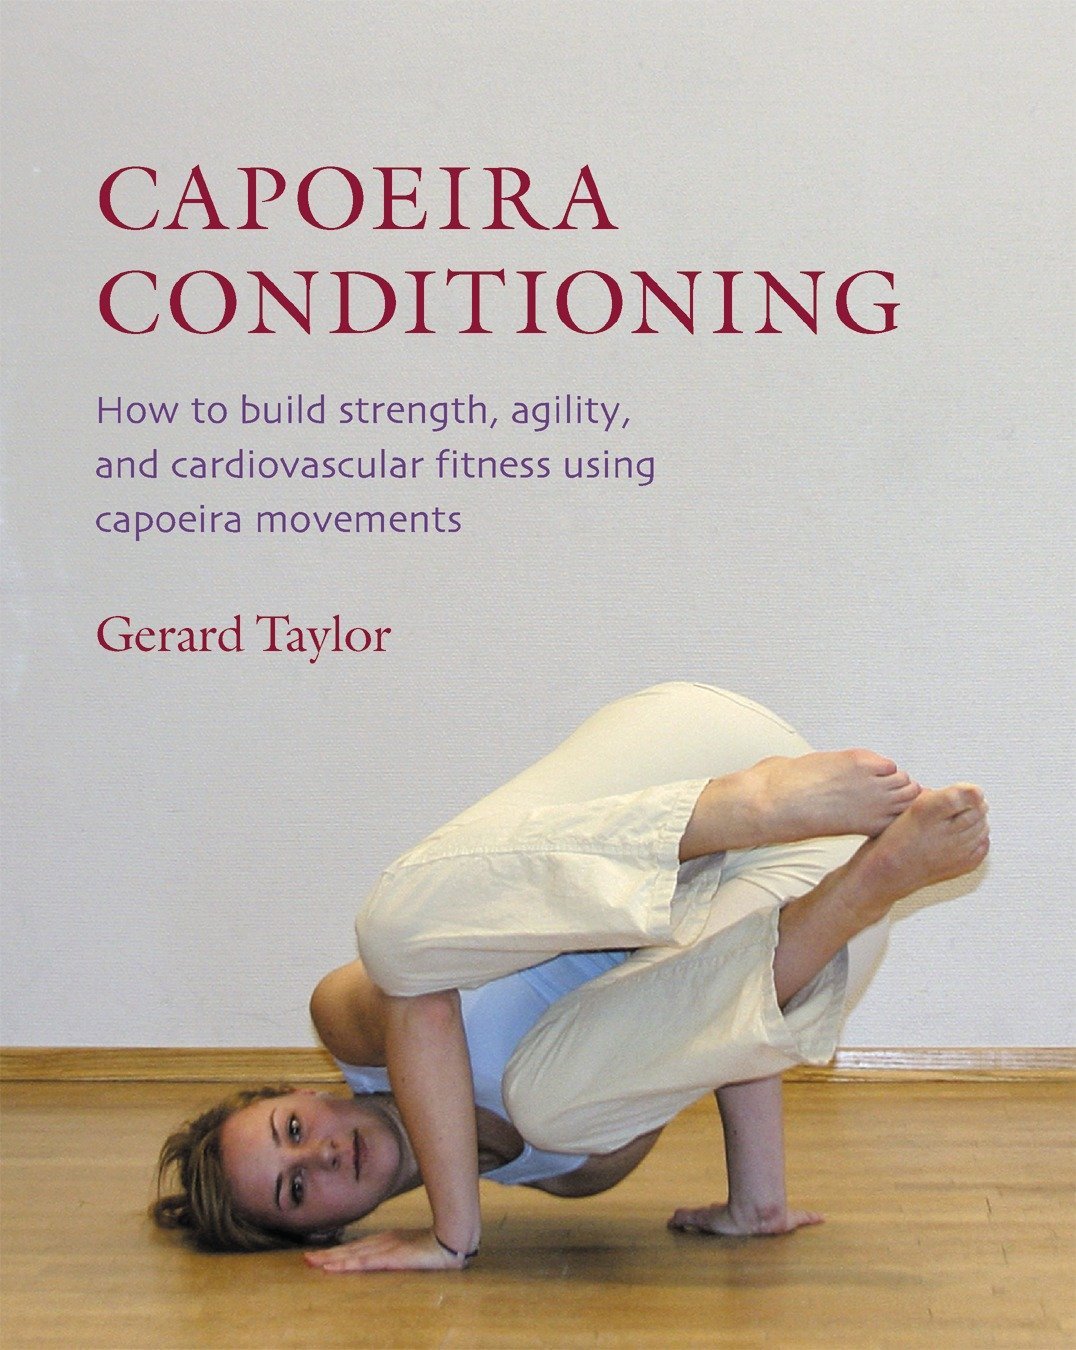 Capoeira Conditioning: How to Build Strength, Agility, and Cardiovascular Fitness Using Capoeira Movements Book by Gerard Taylor (Preowned) - Budovideos Inc